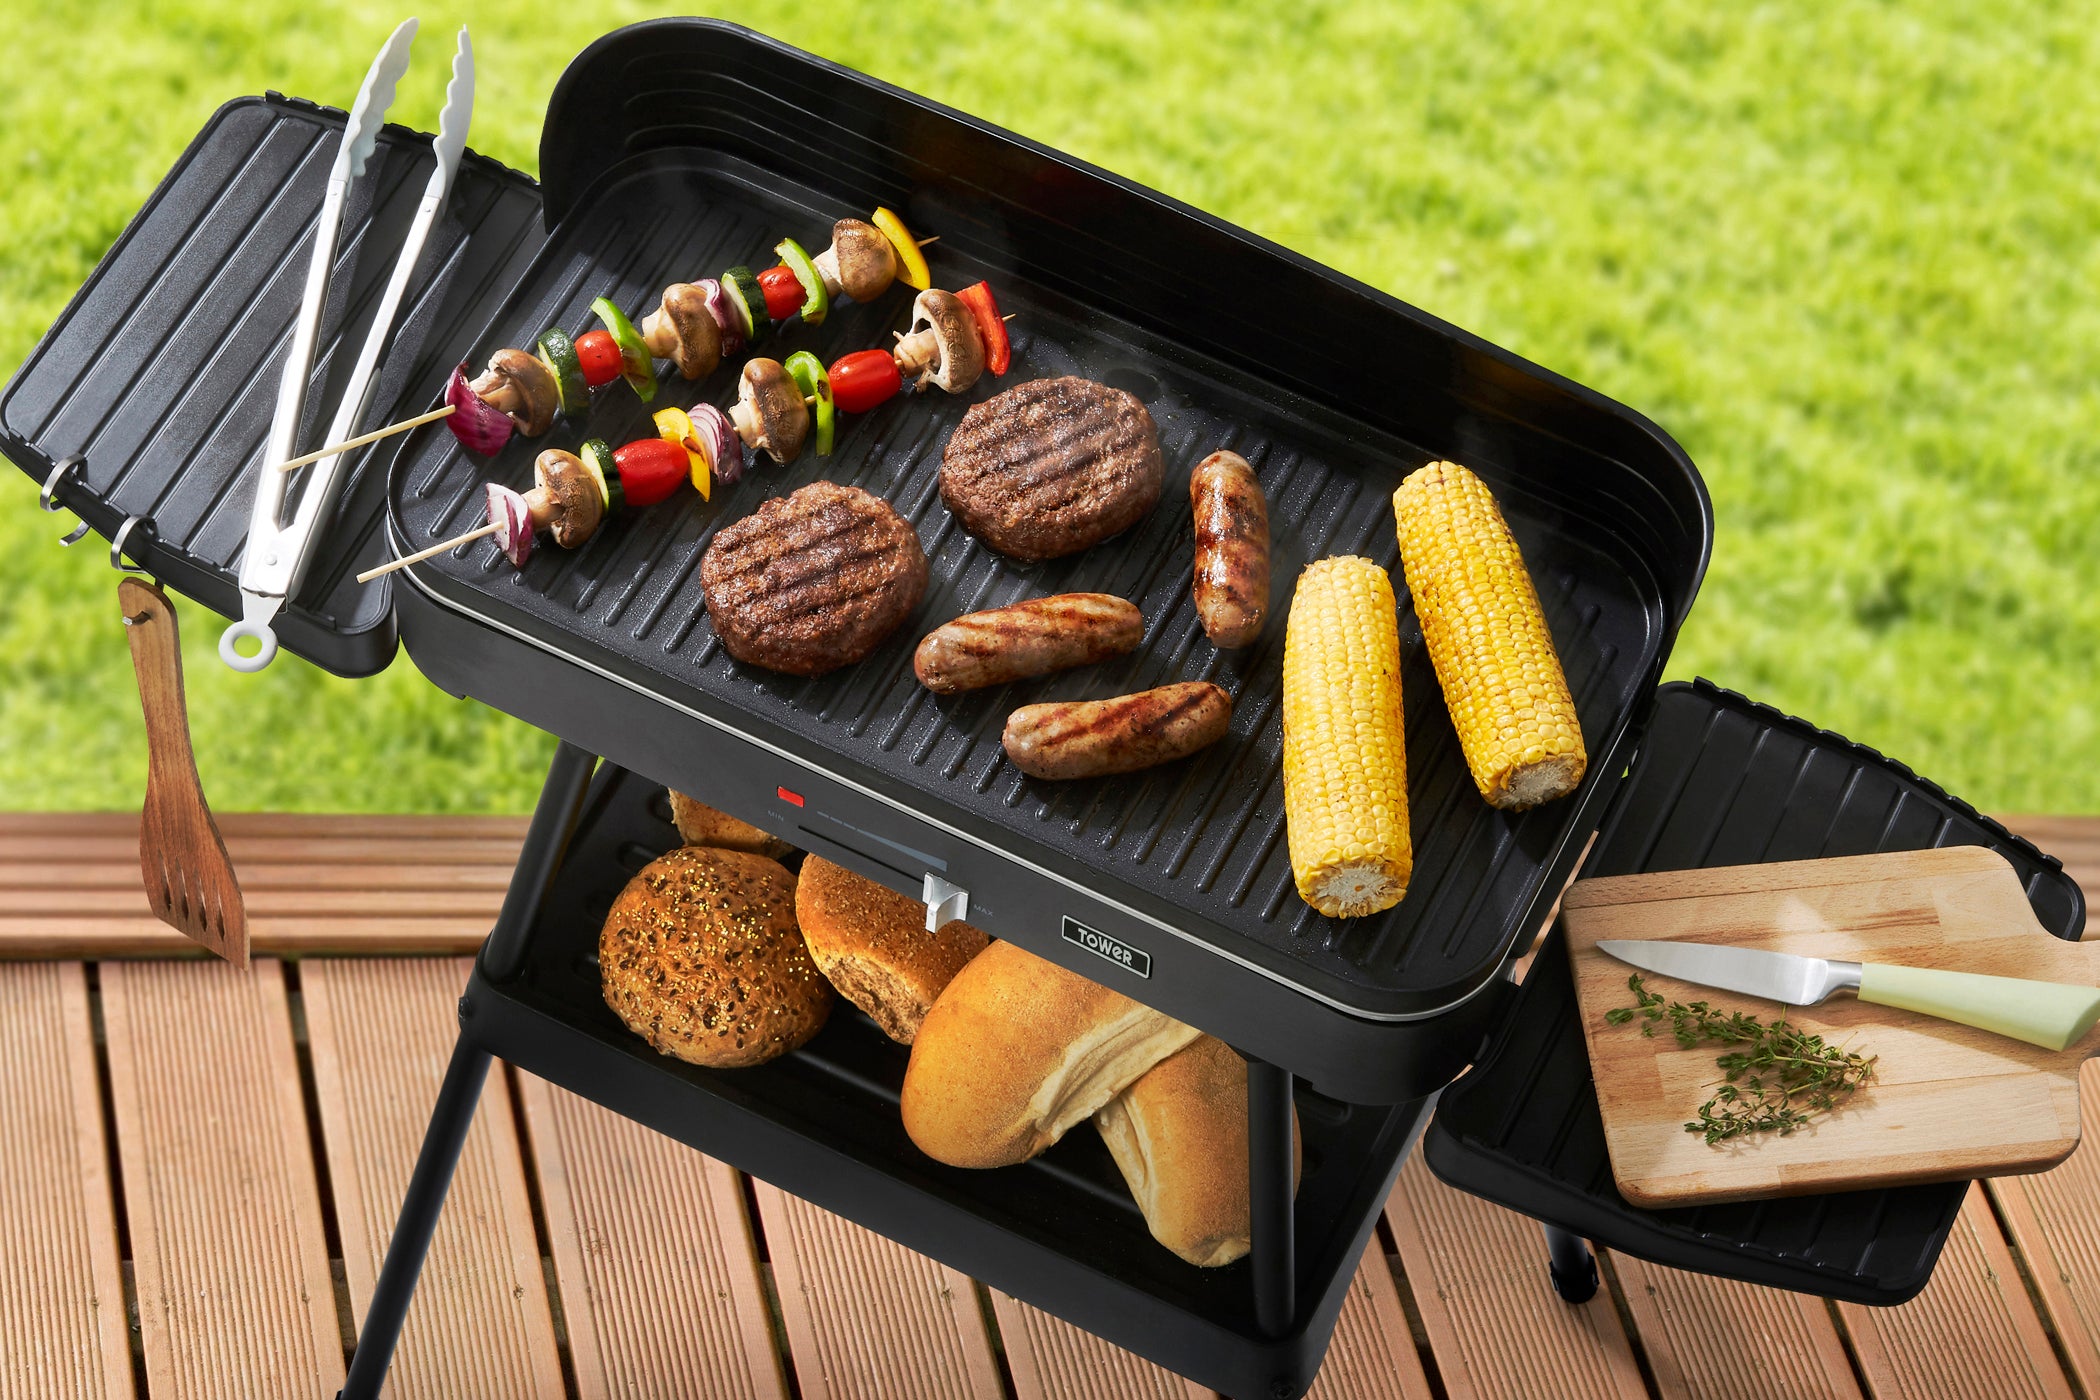 https://www.trustedreviews.com/wp-content/uploads/sites/54/2018/08/TOWER-indoor-outdoor-electric-grill-with-stand-T14028_1-www.amazon.co_.uk_.jpg